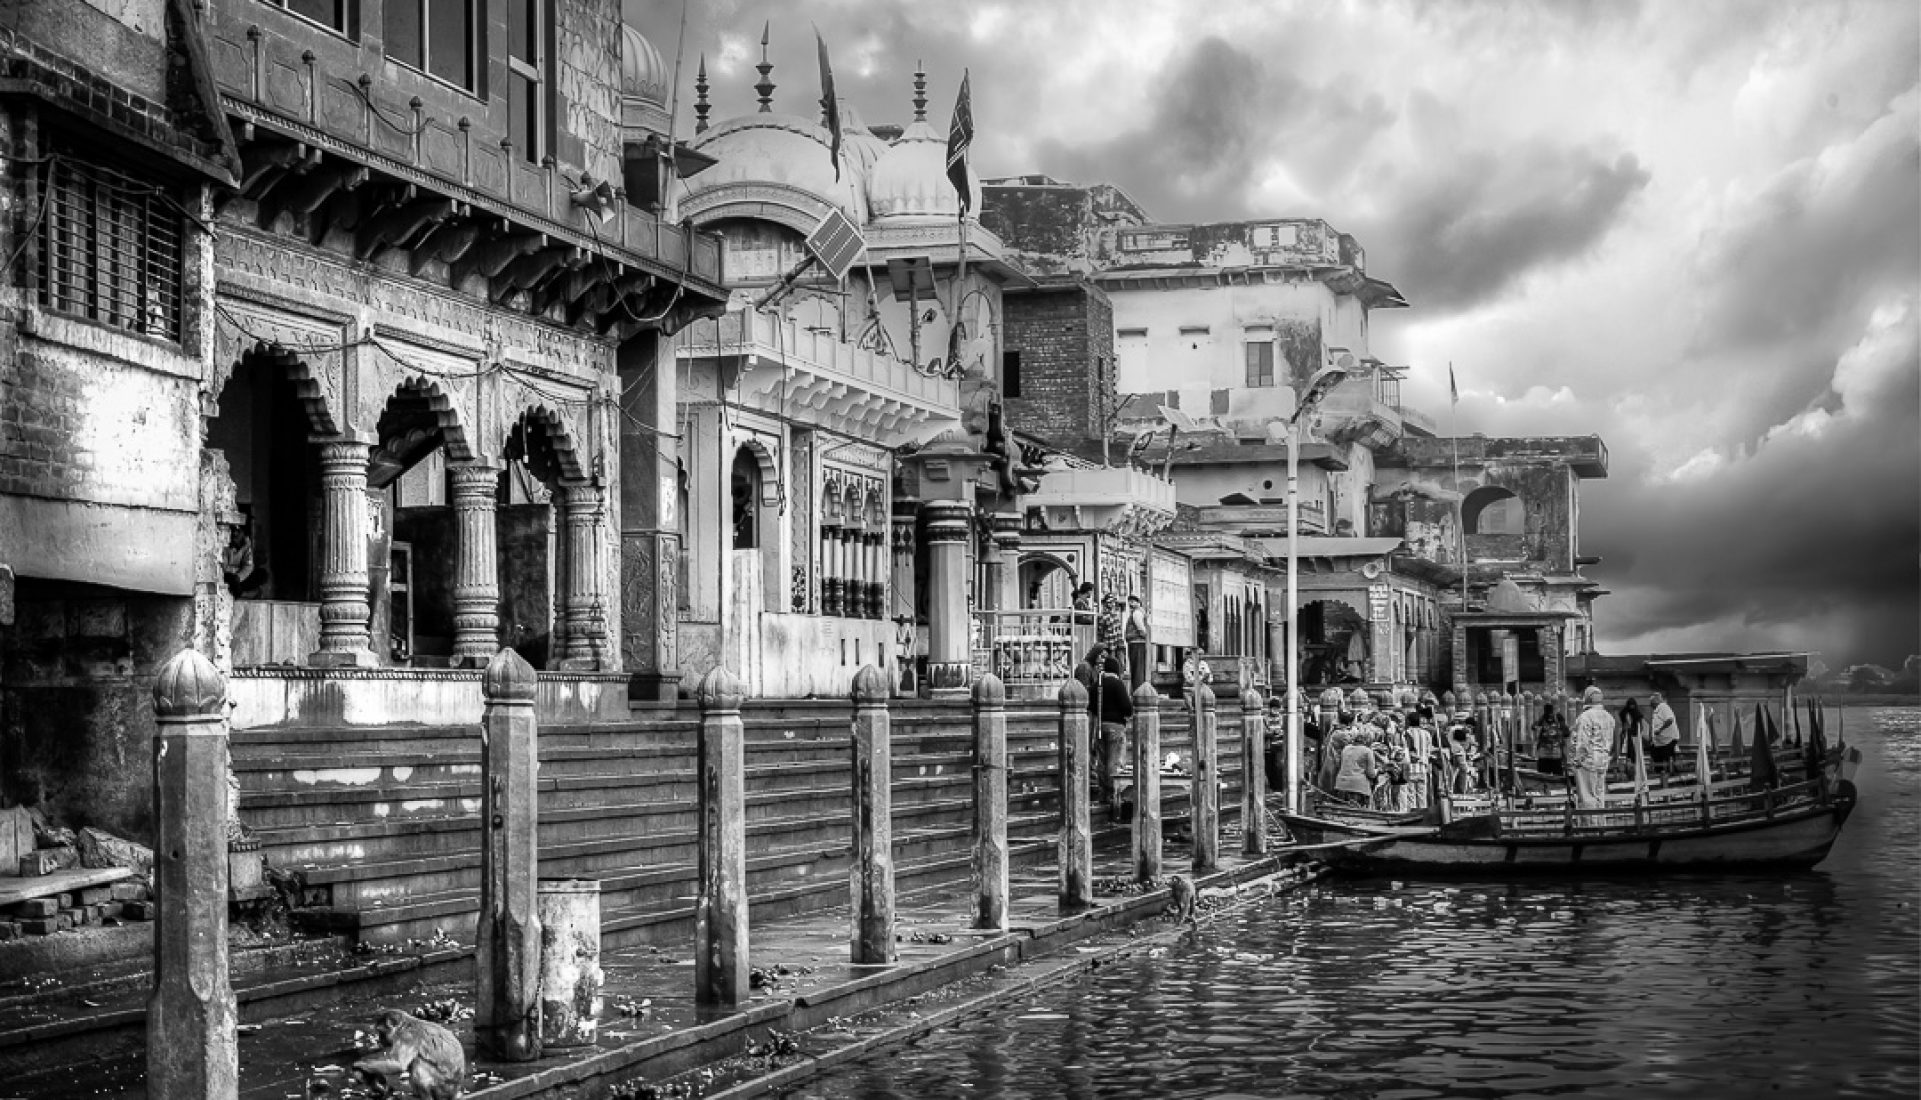 Images of India – The Ghats at Mathura